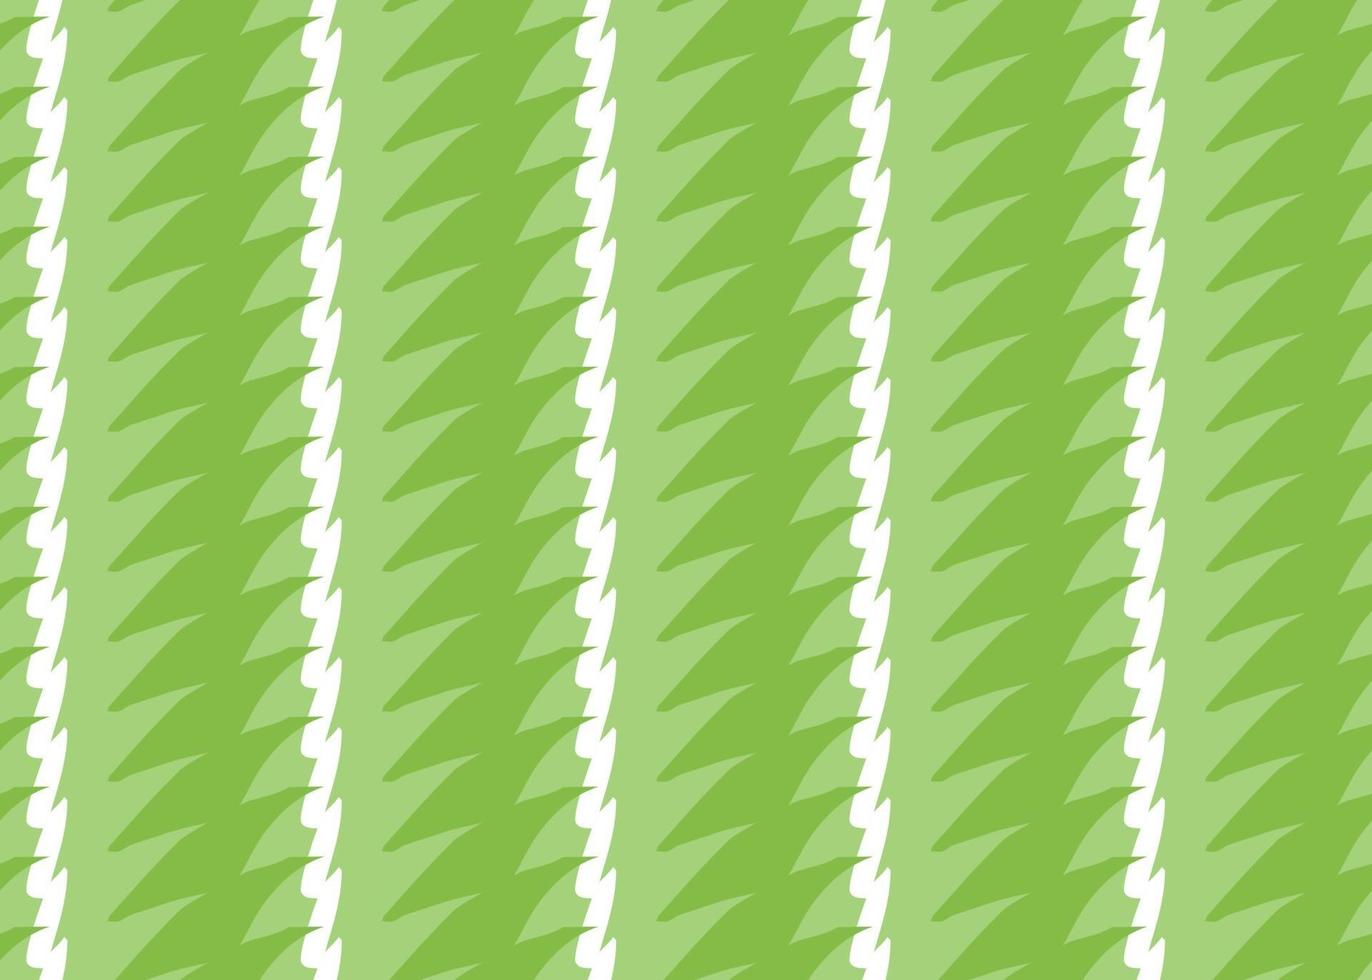 Vector texture background, seamless pattern. Hand drawn, green, white colors.